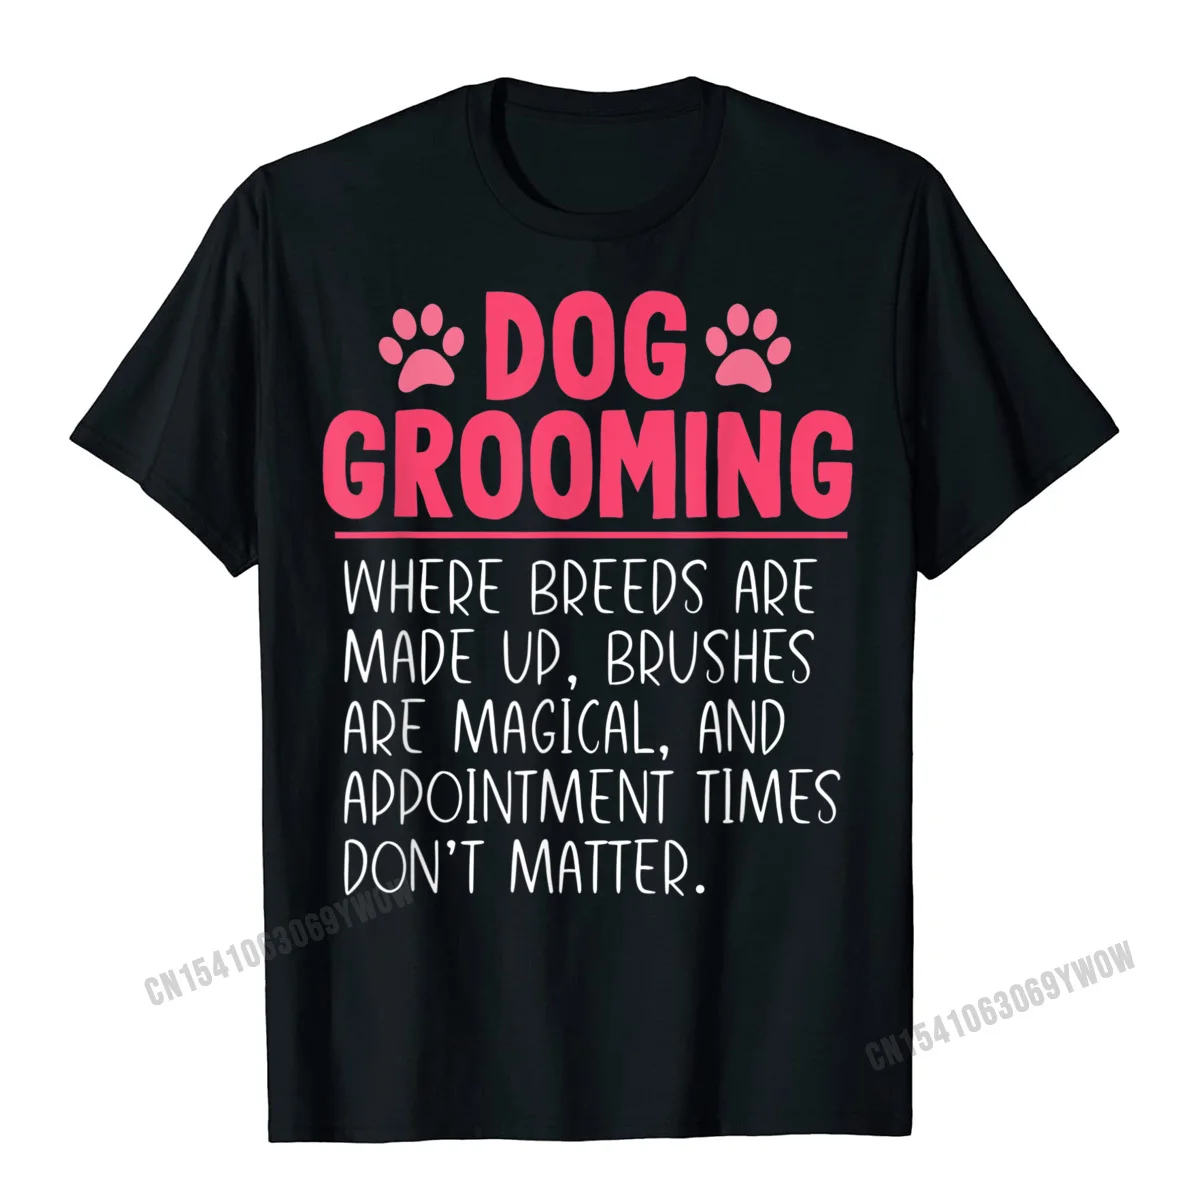 Casual Printed On Tops Shirts for Men 2021 Labor Day Round Neck All Cotton Short Sleeve T-shirts Crazy Tshirts Dog Groomer Funny Breeds Joke Pet Grooming Puppy Care Gift T-Shirt__591 black